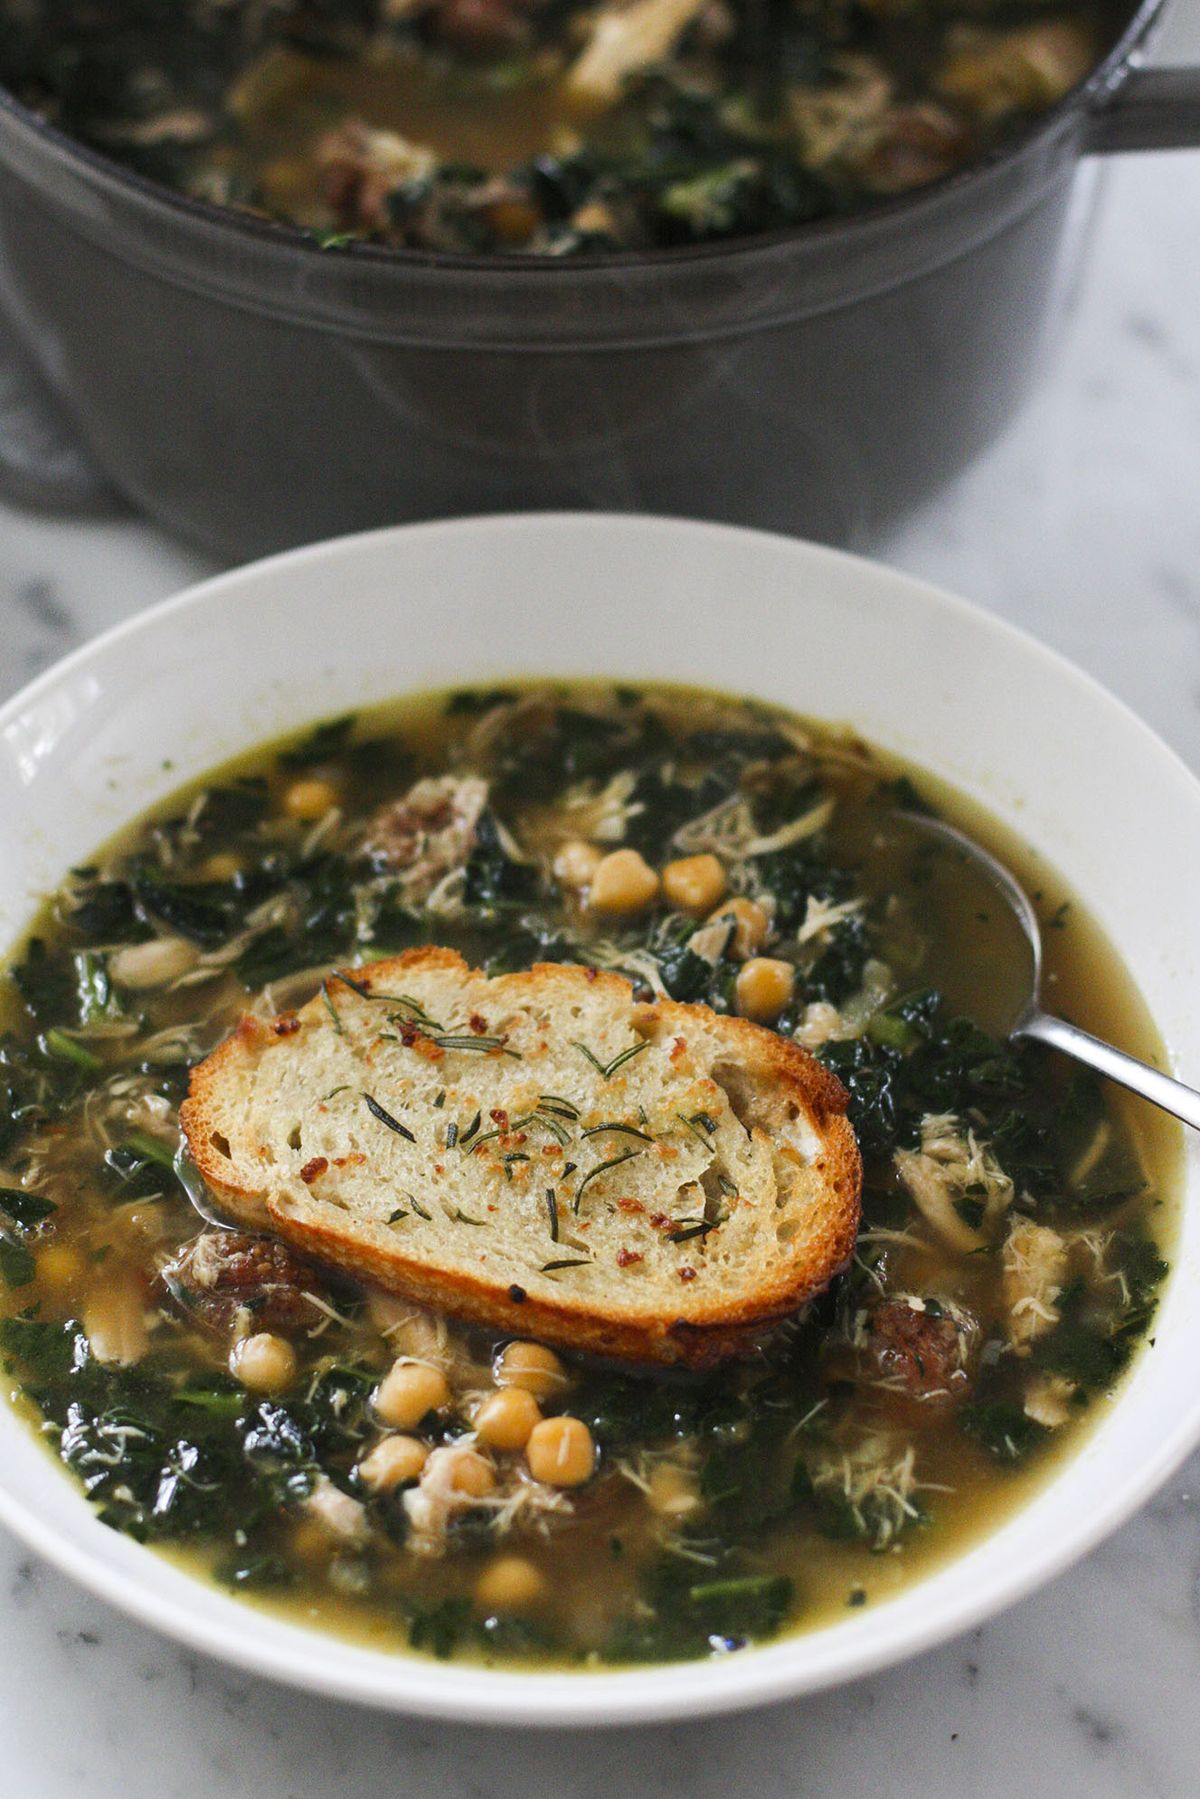 This hearty chickpea soup, topped with a homemade rosemary crouton, includes chicken, sausage and kale.